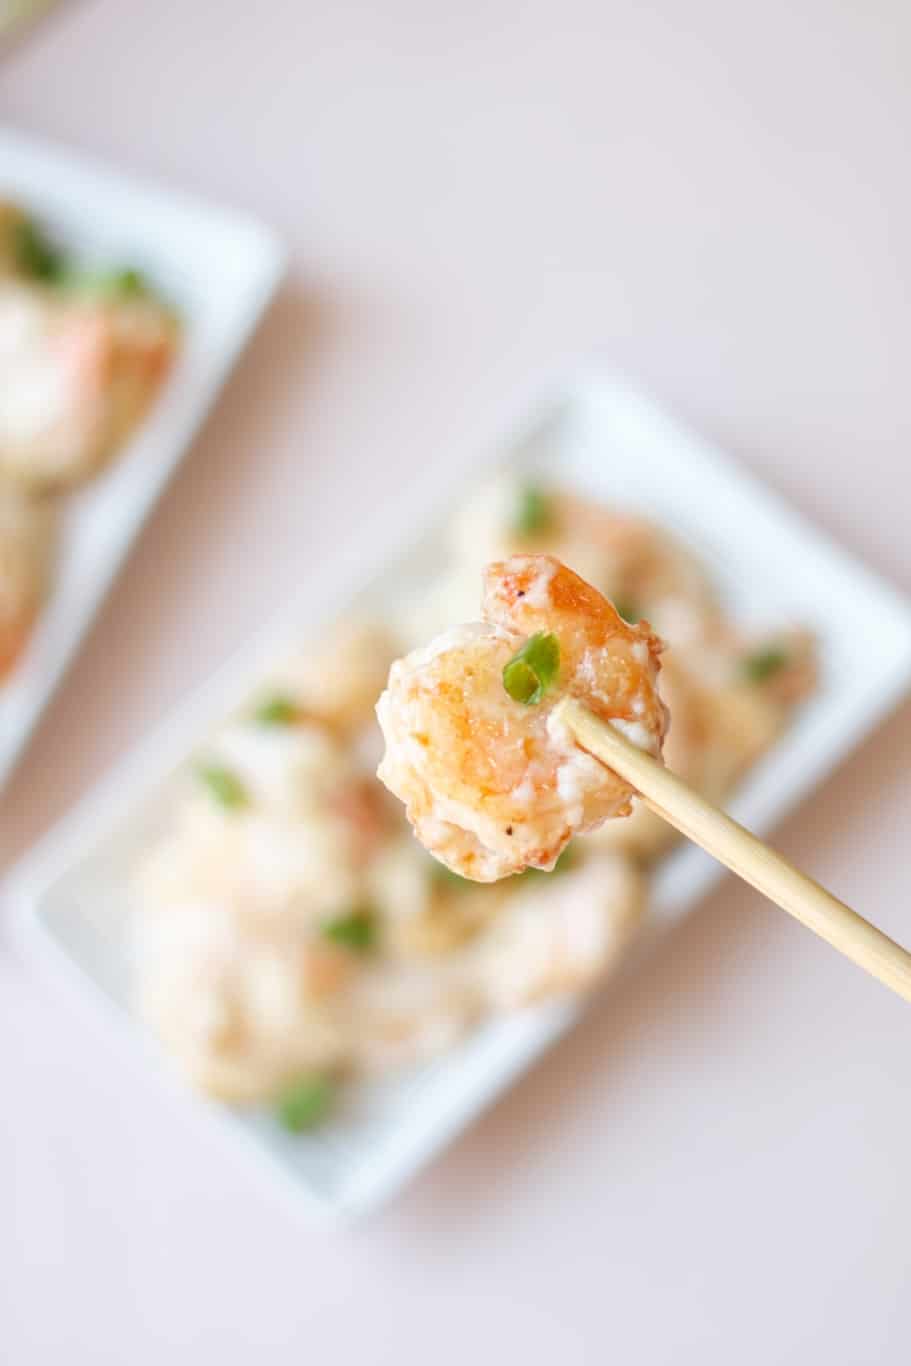 You’ll adore this savory but simple shrimp dish if you like a quick weekday dinner! Eat it with a chopstick